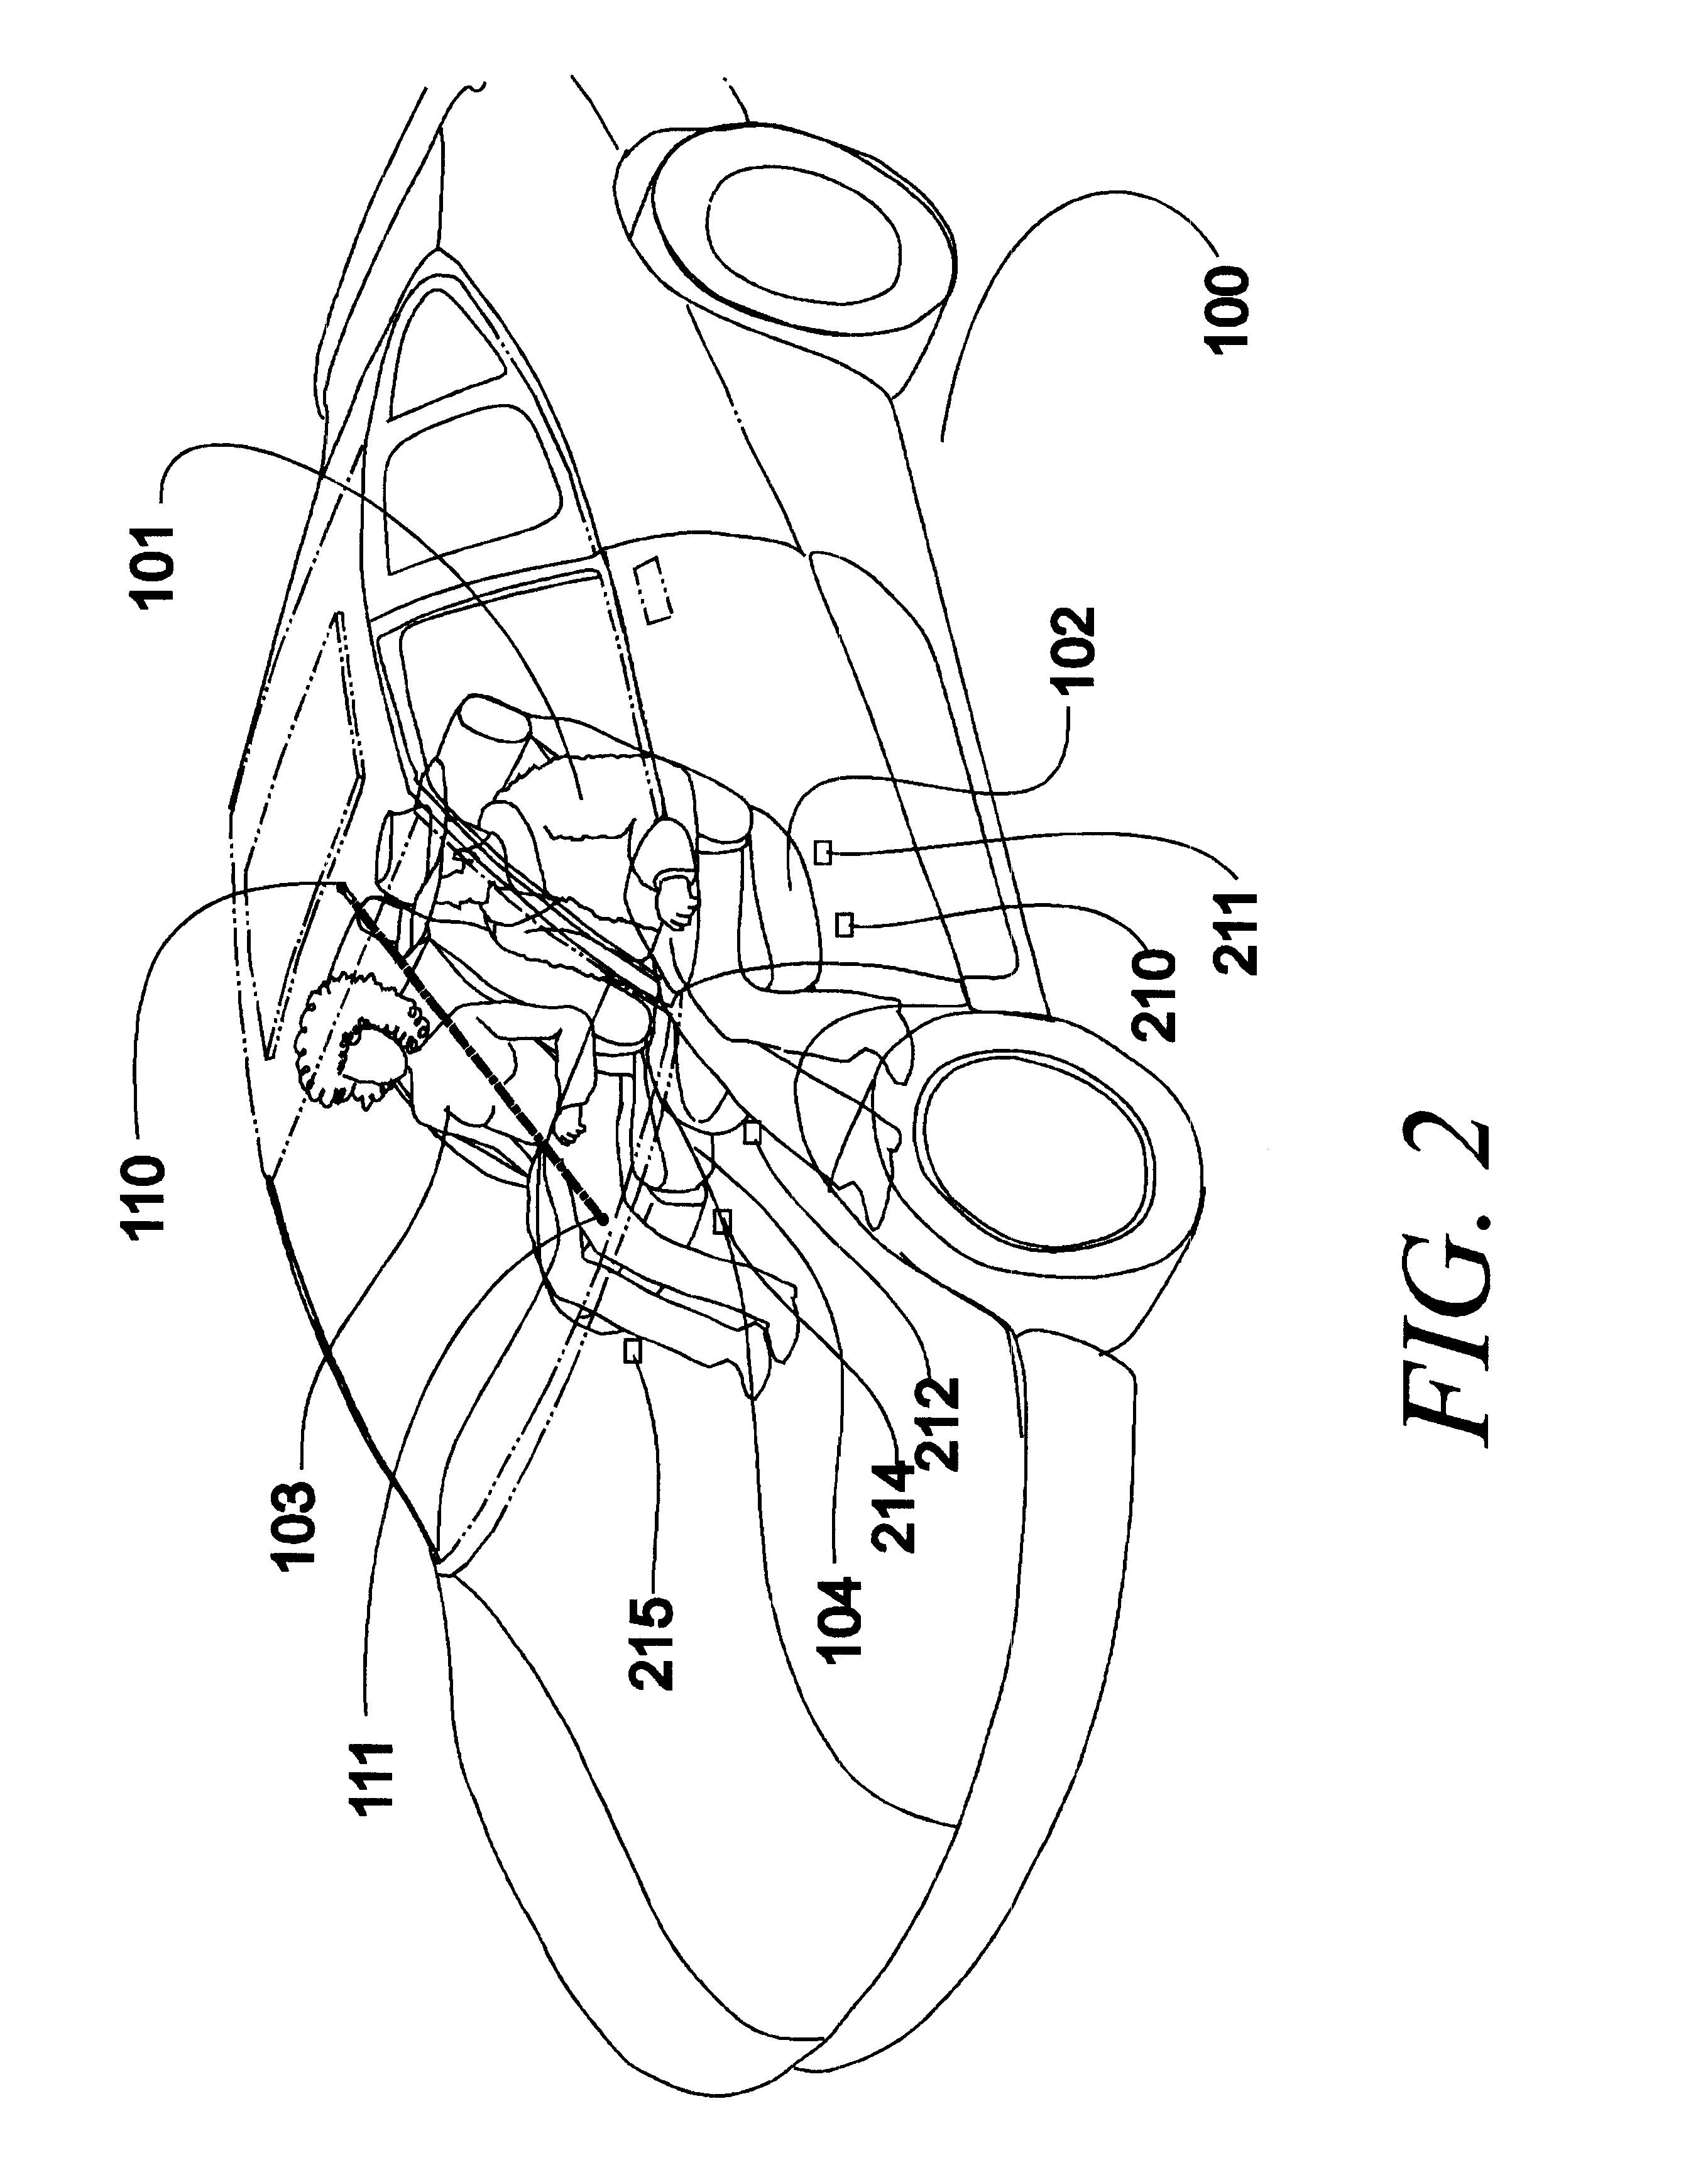 Arrangements for detecting the presence or location of an object in a vehicle and for controlling deployment of a safety restraint